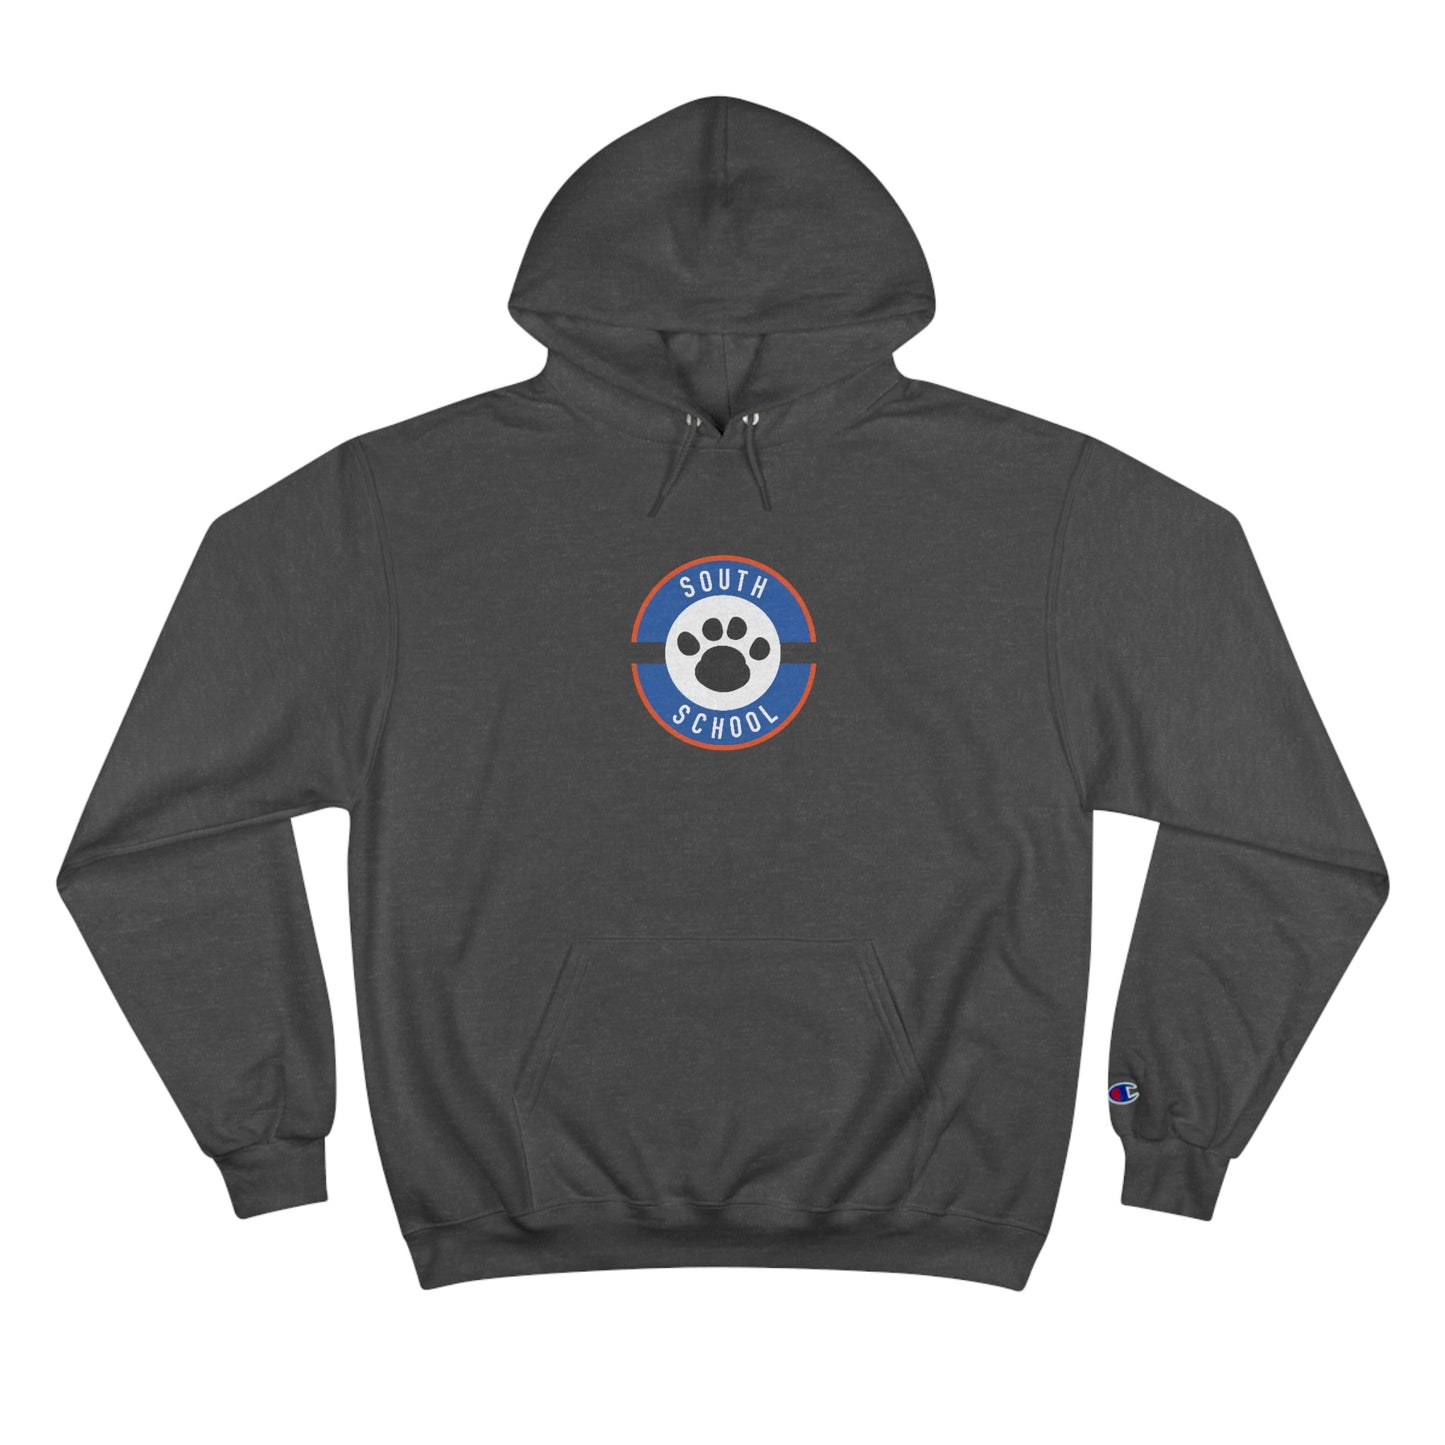 Champion Adult Hoodie, South Tiger Paw (Multiple Colors Available)